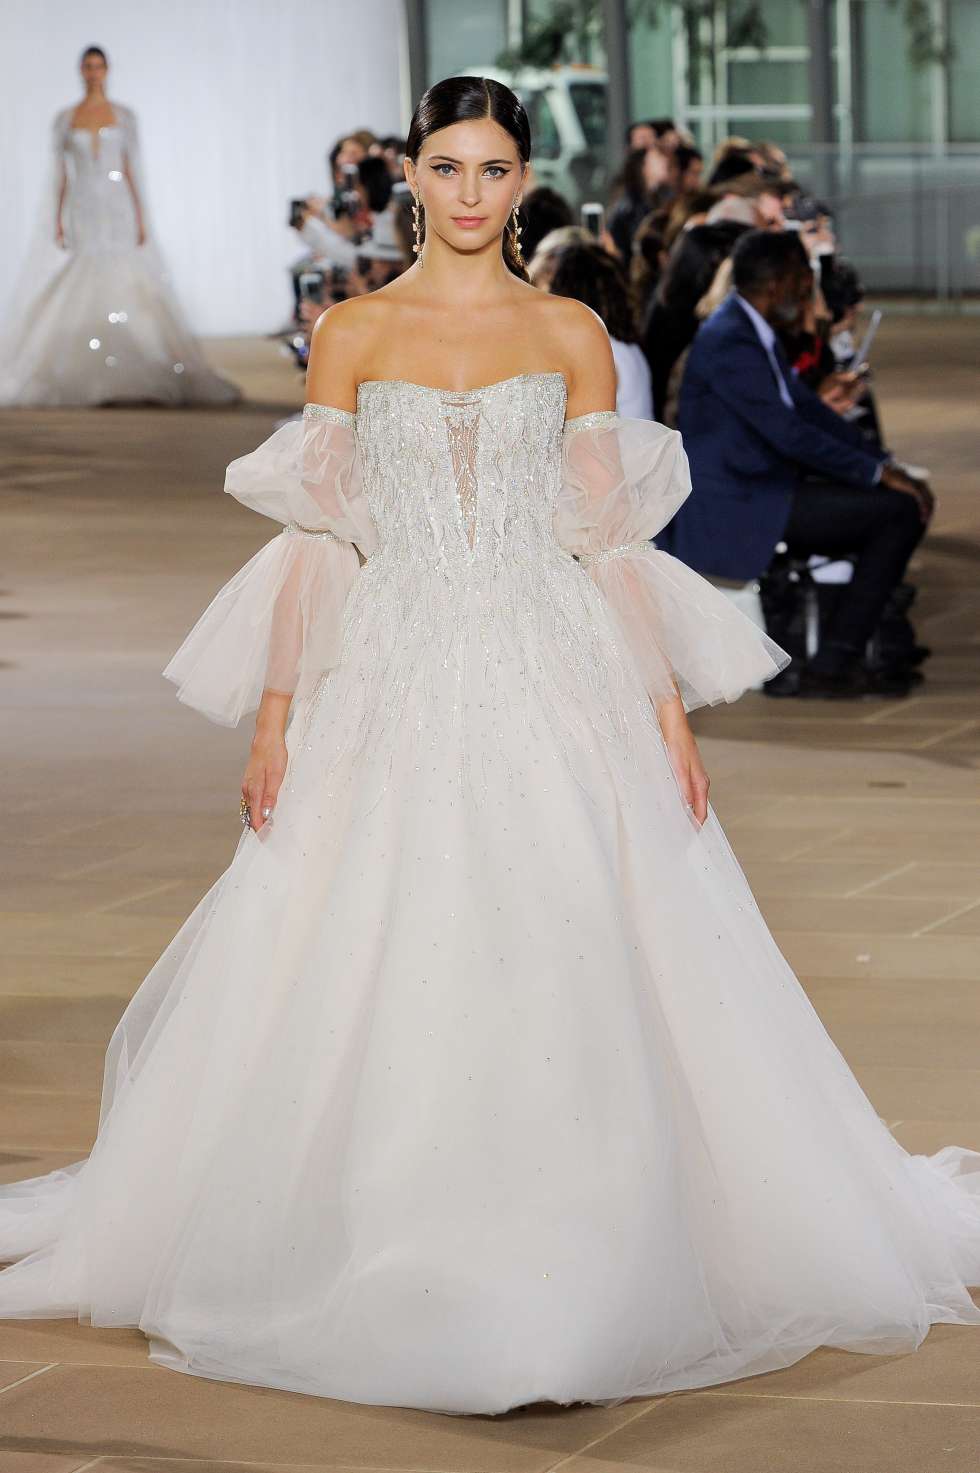 The Ines Di Santo Fall 2019 Wedding Dress Collection